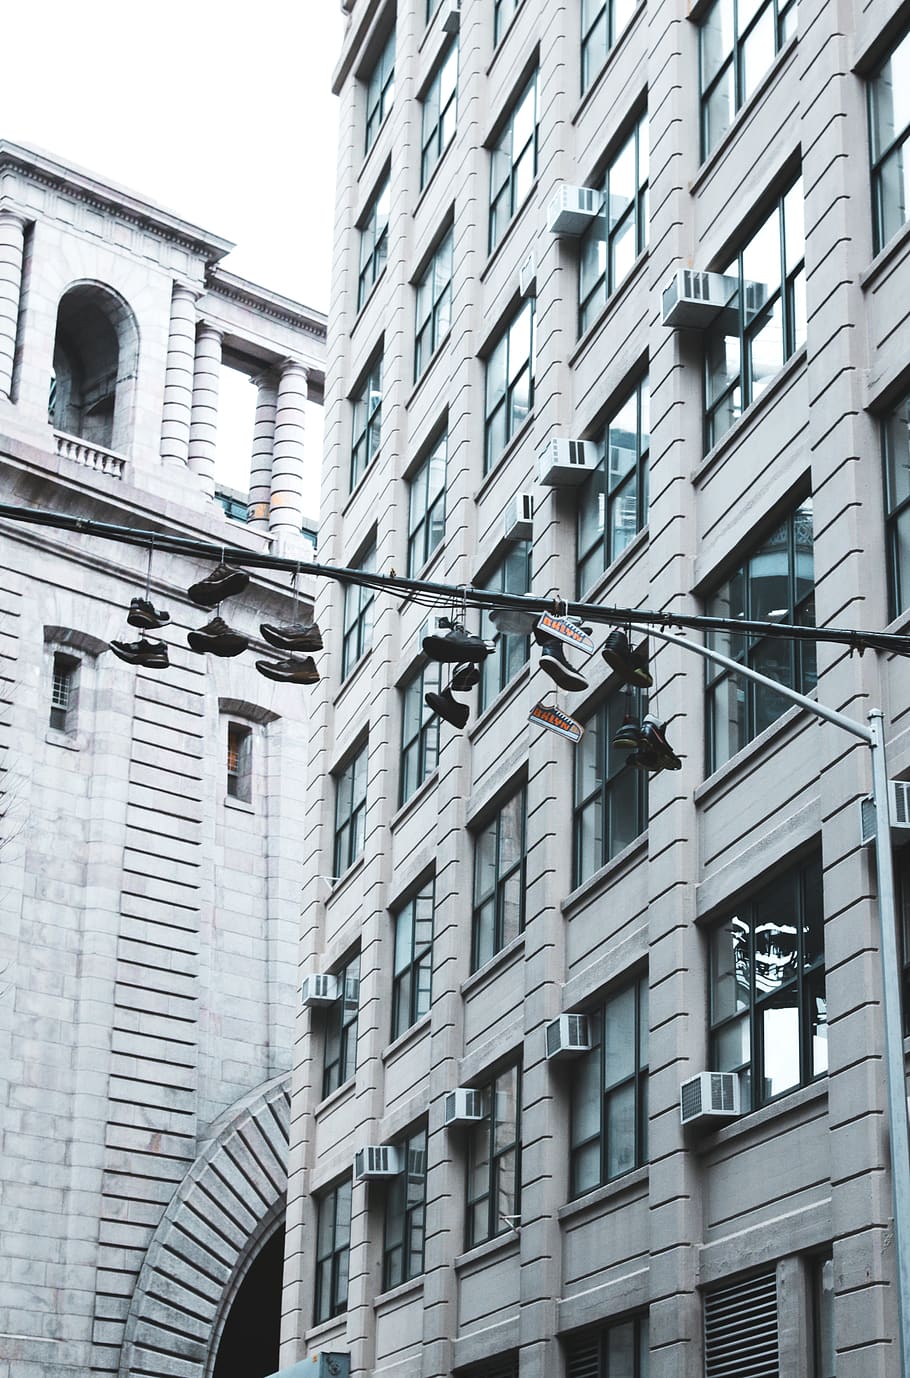 shoes hanging on street pole, architecture, skyscraper, building, HD wallpaper